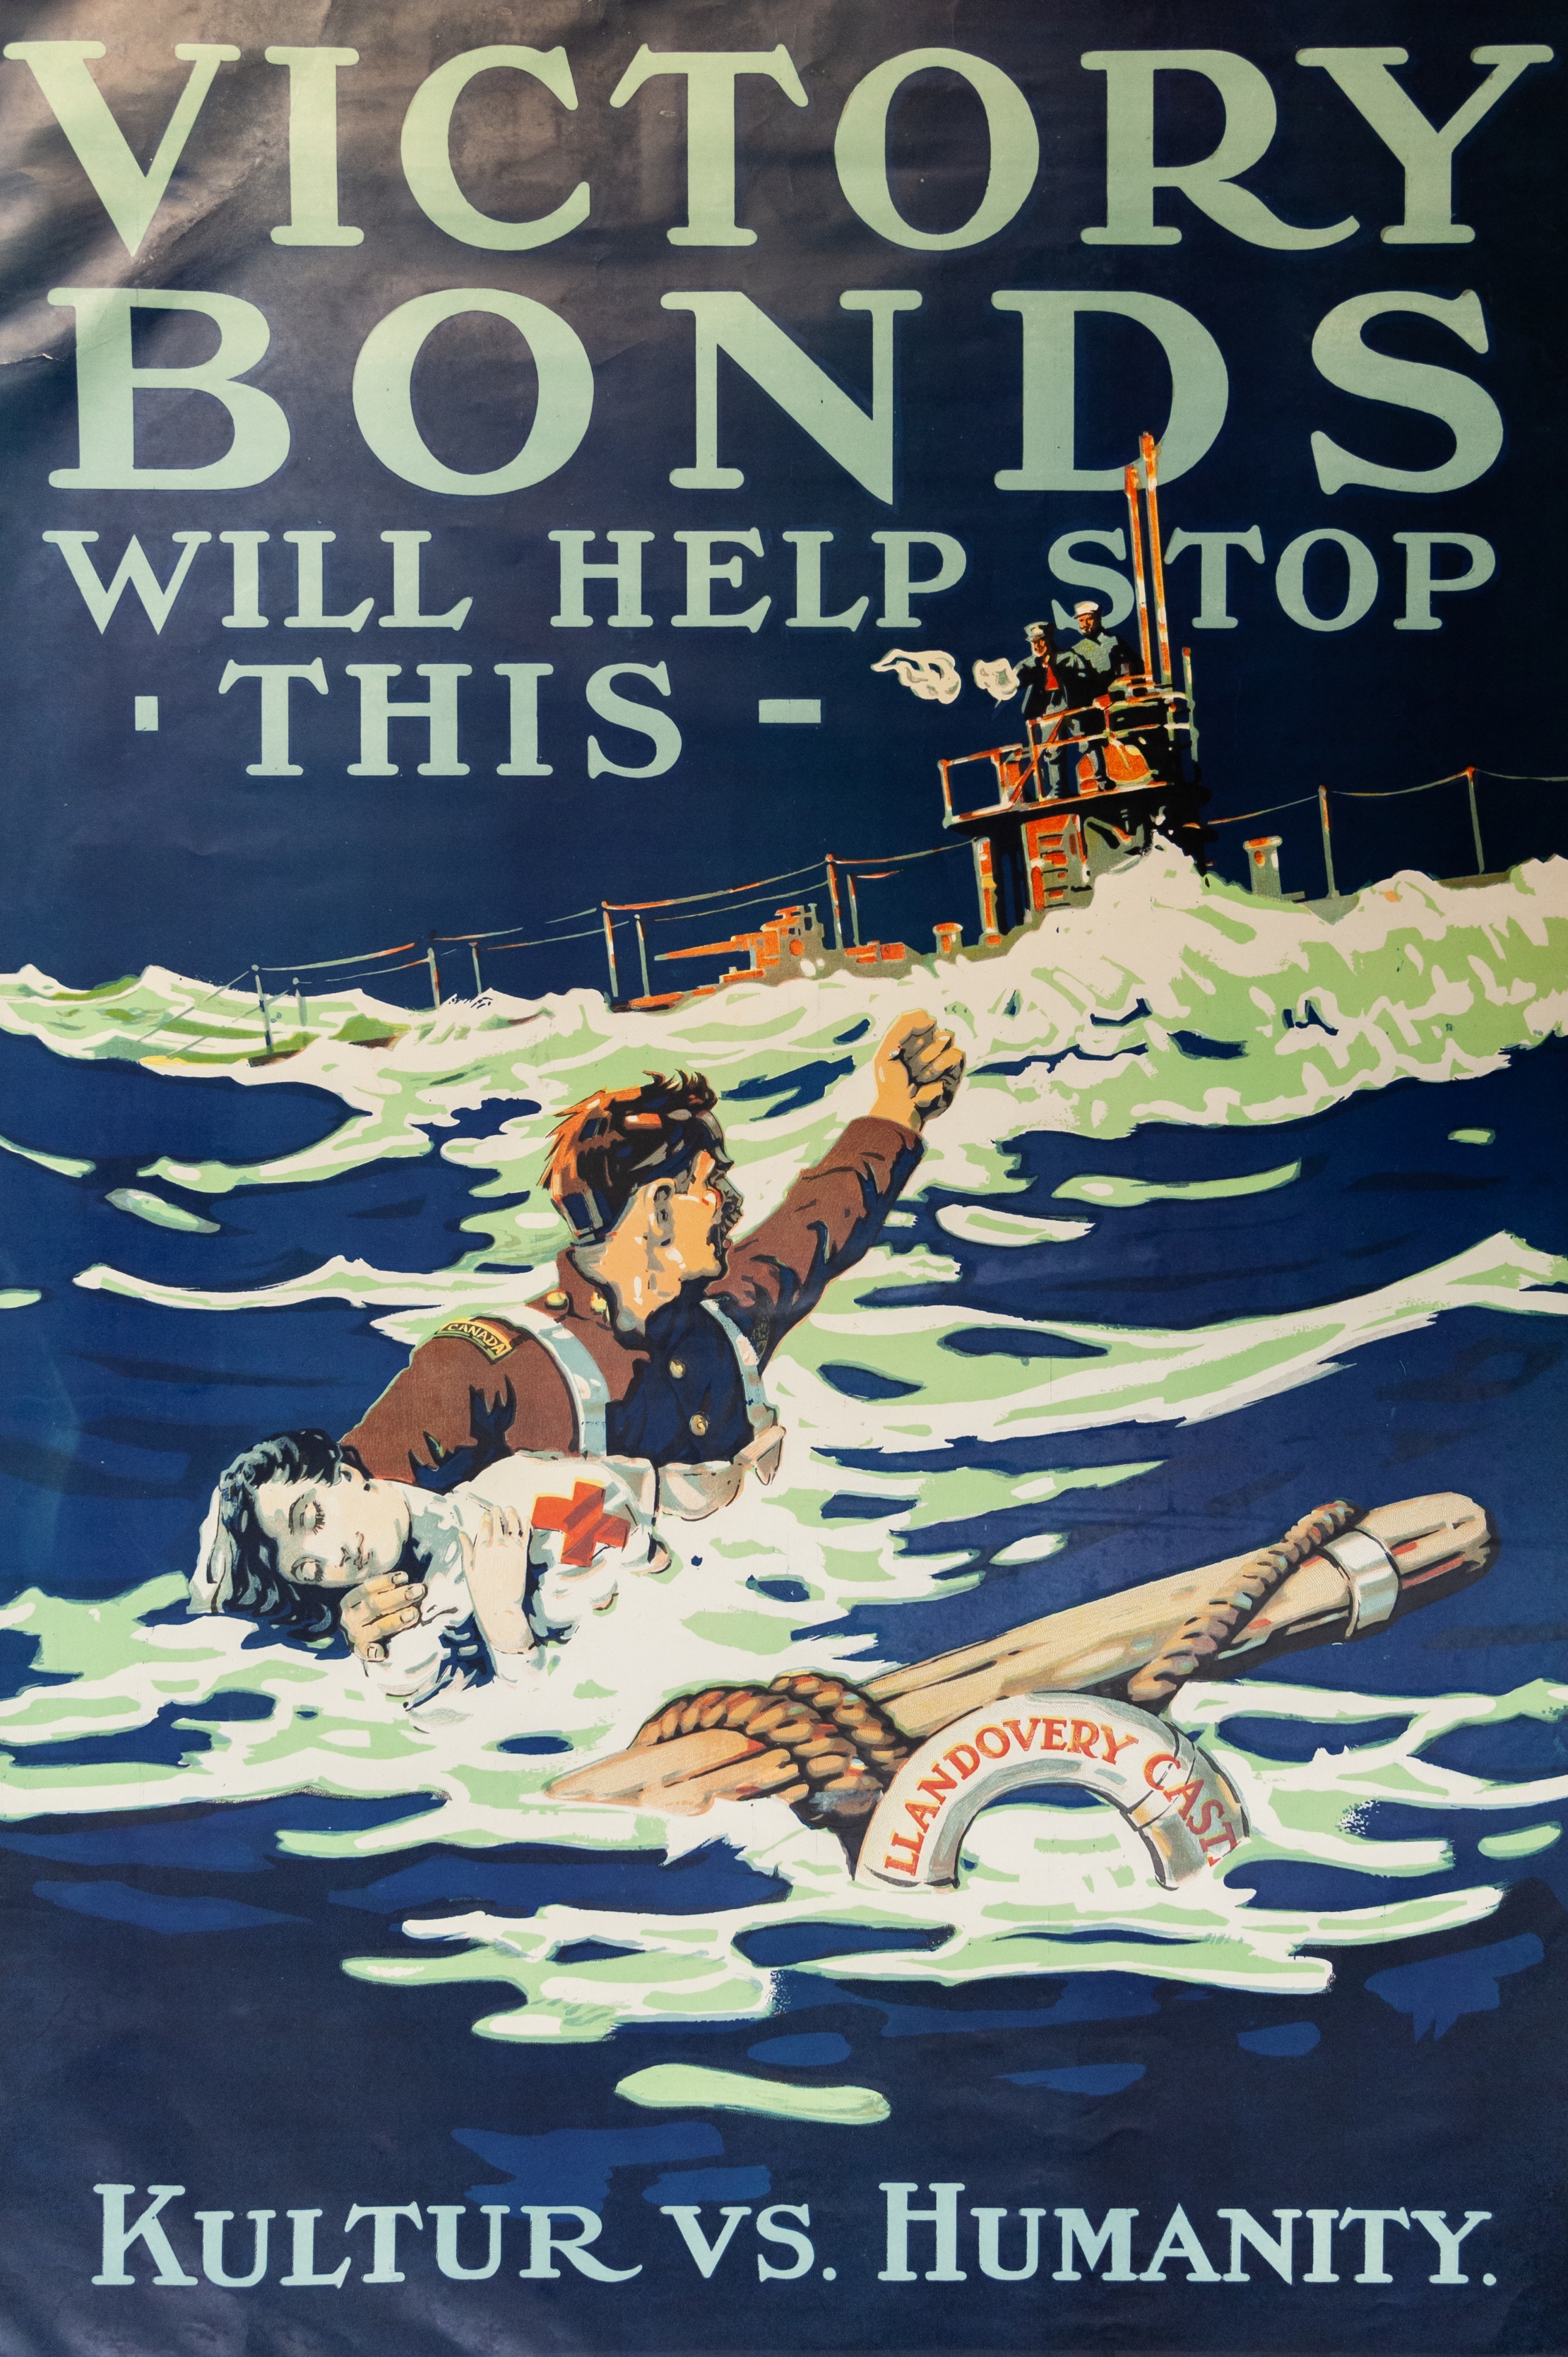 “Victory Bonds Will Help Stop This. Kultur Vs. Humanity” poster, no.WP2, First World War poster collection